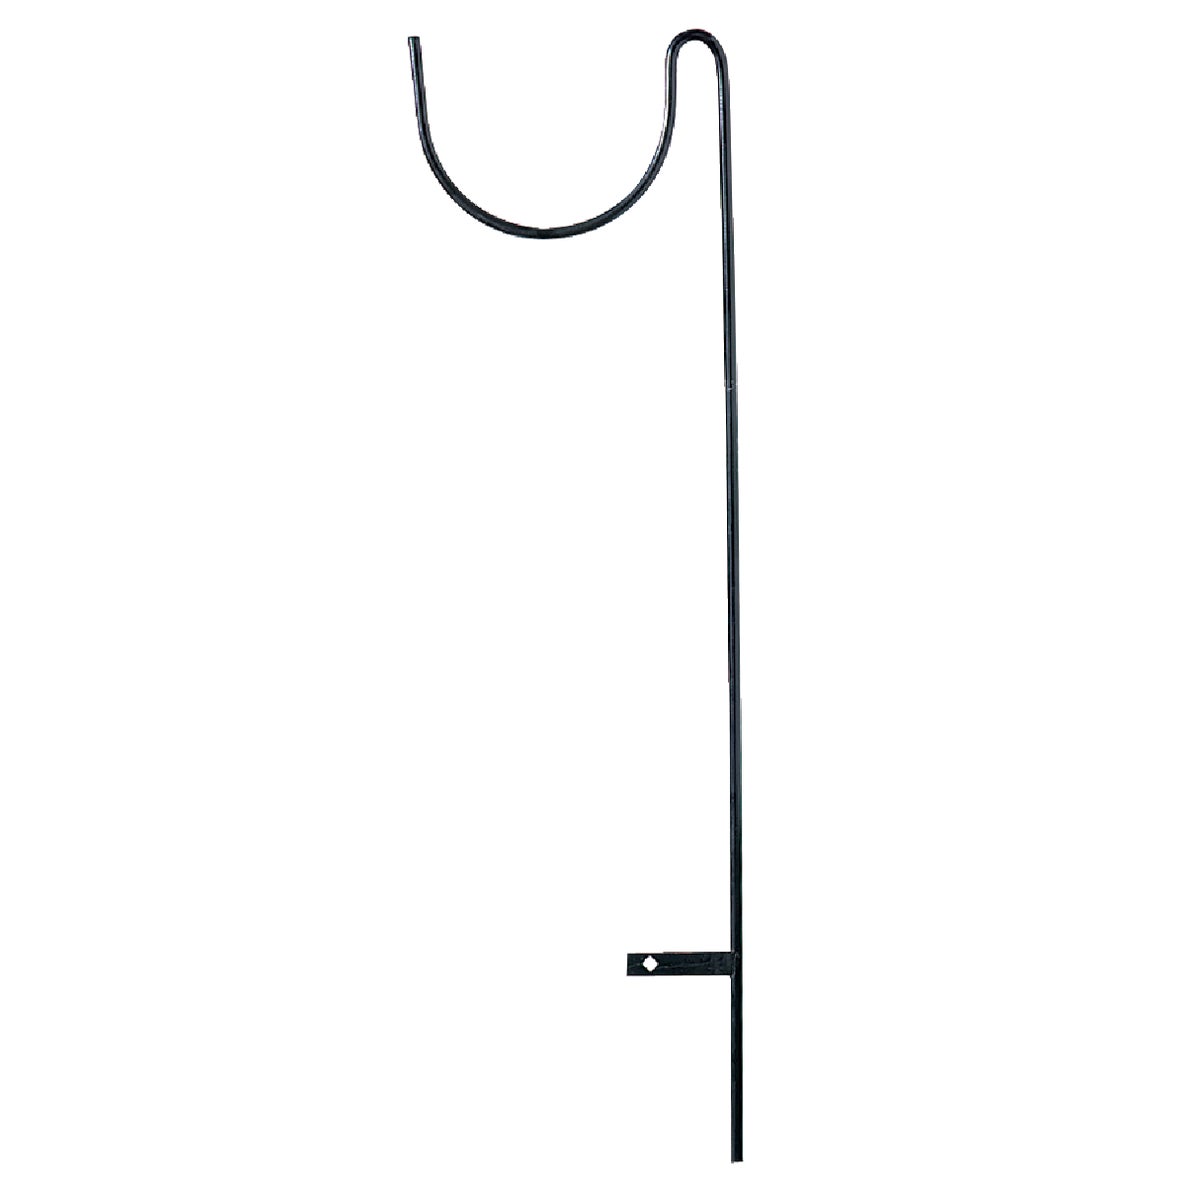 Item 710074, Self-supporting rod that installs easily in the ground by using the built-